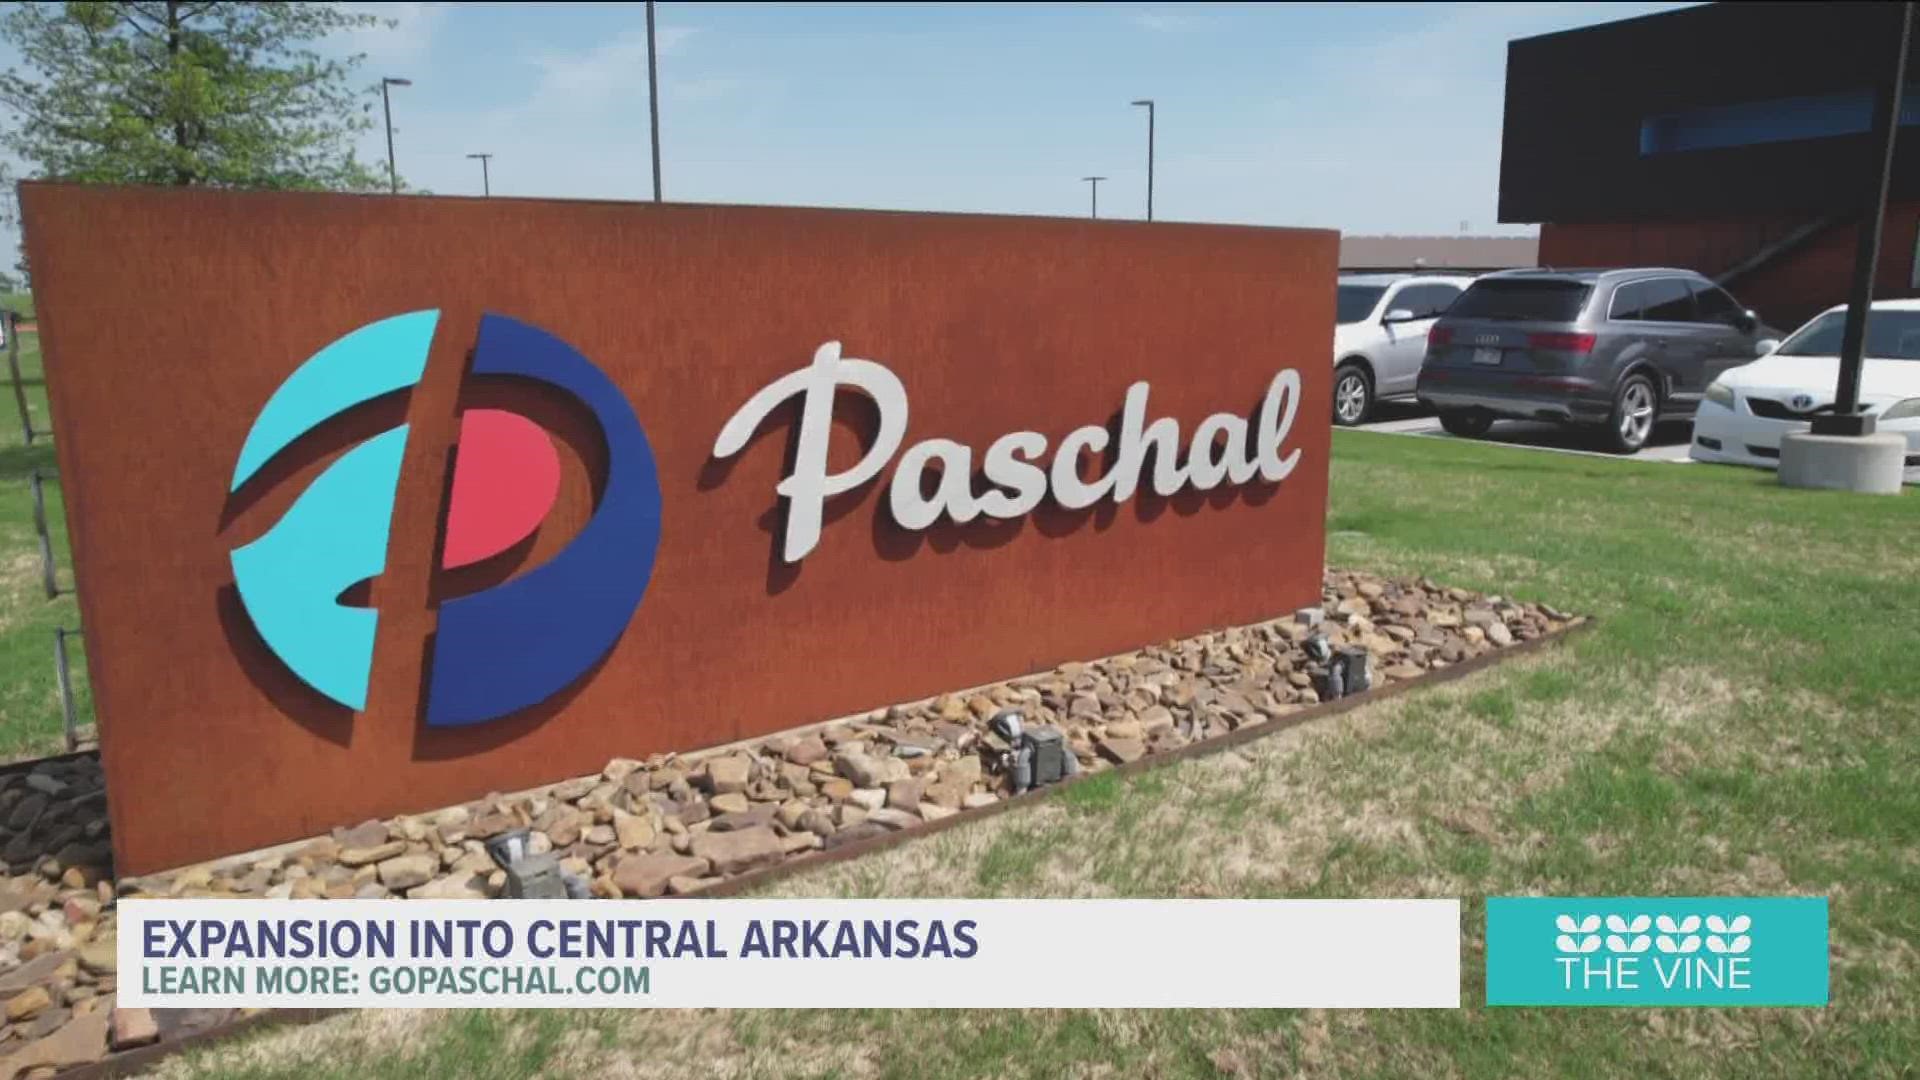 For over 40 years, Paschal Air has been serving communities here in Arkansas.